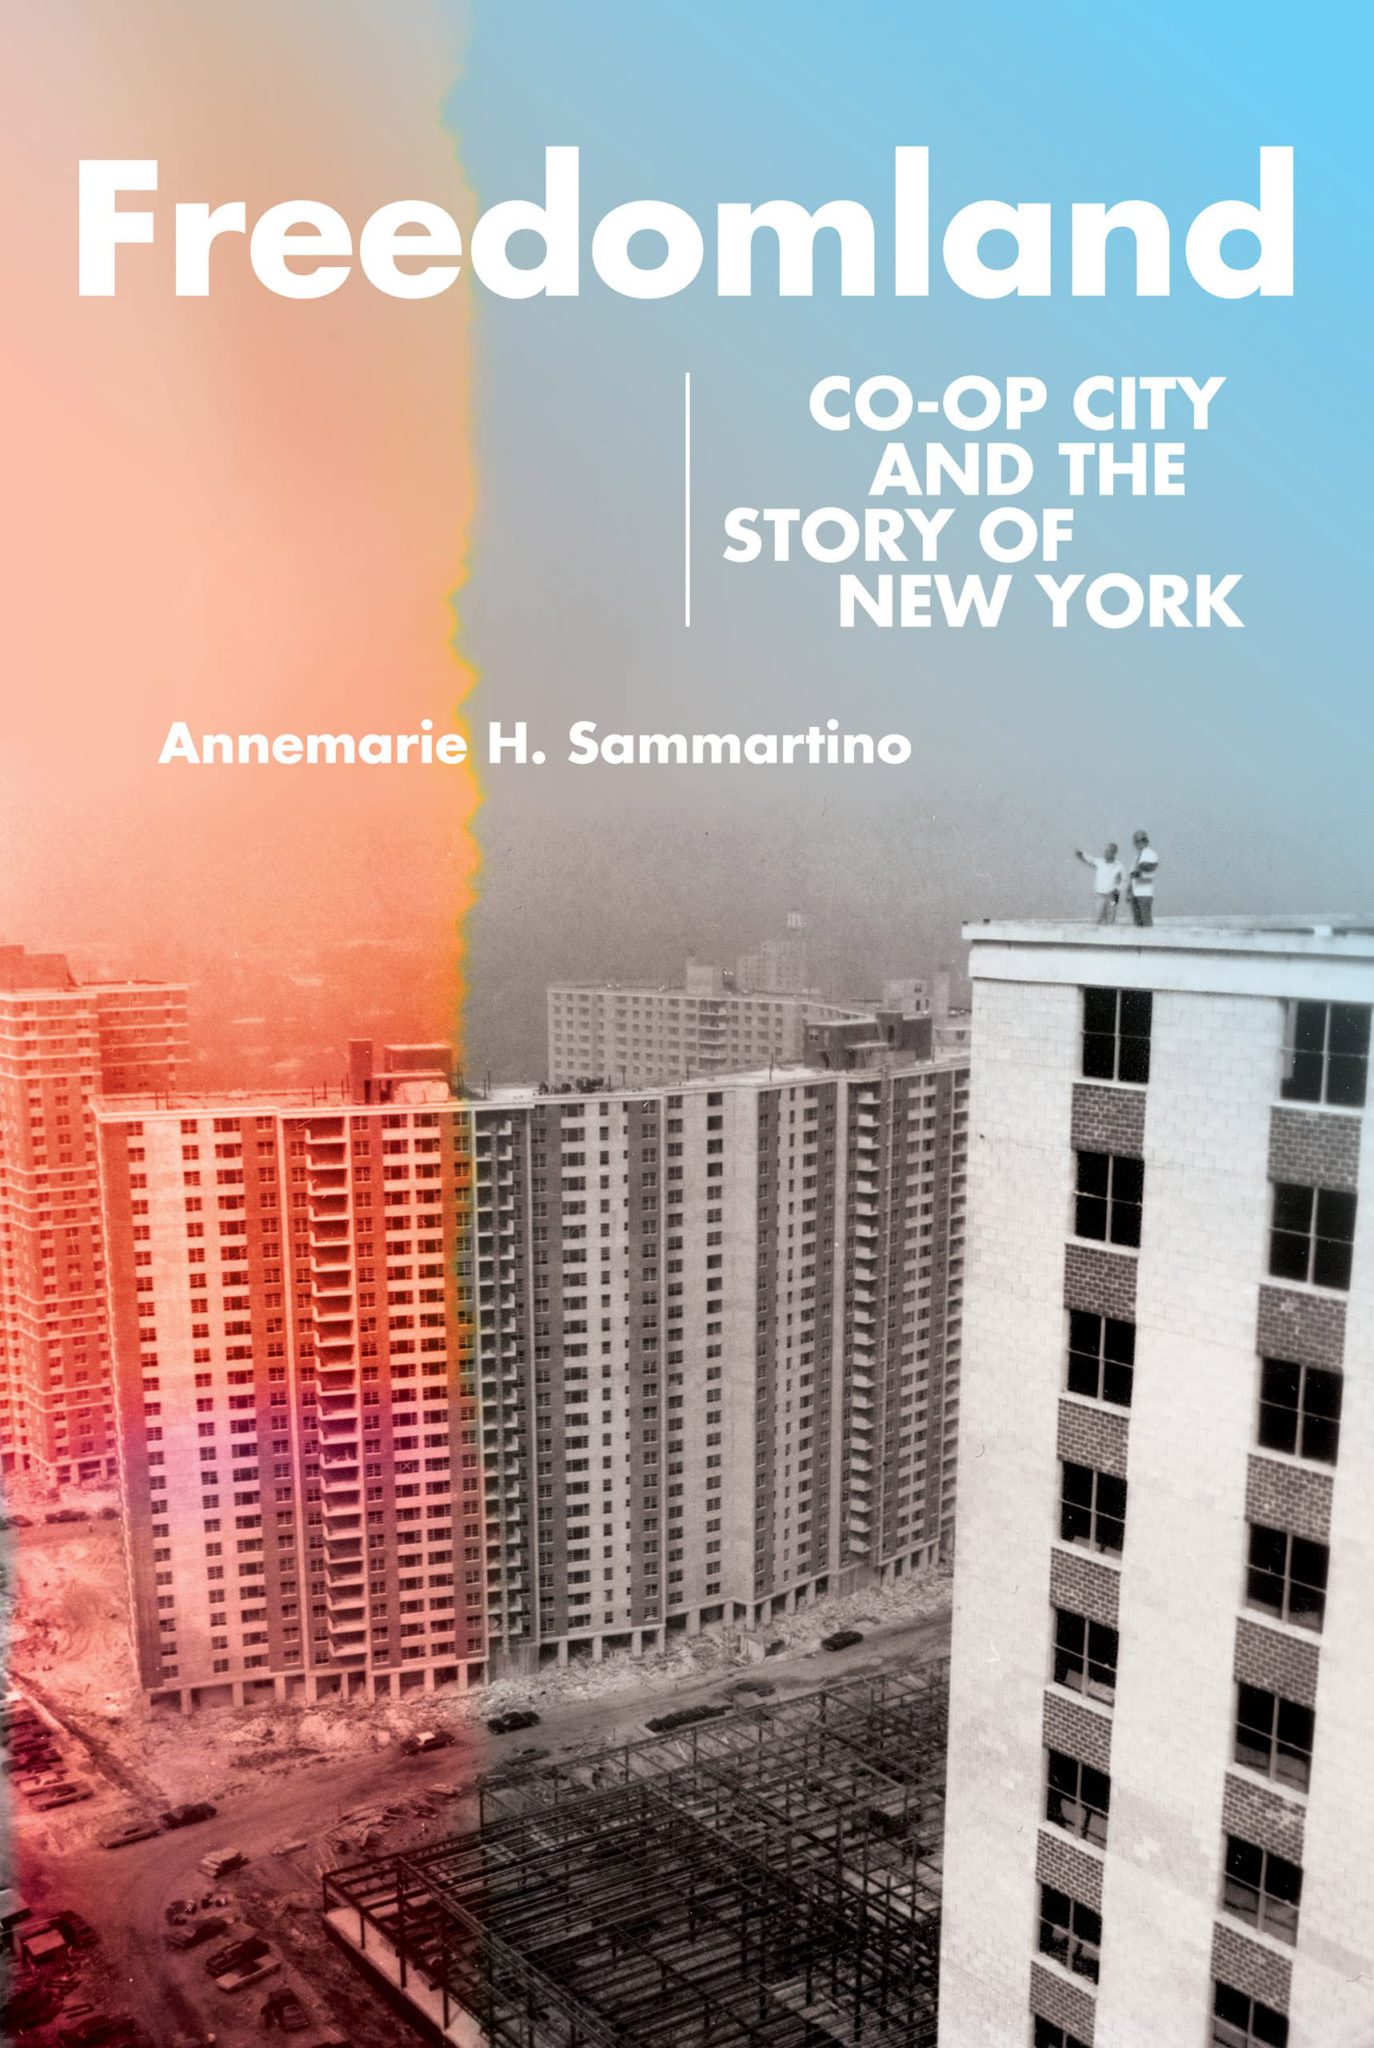 Book Talk – Freedomland: Co-op City and the Story of New York